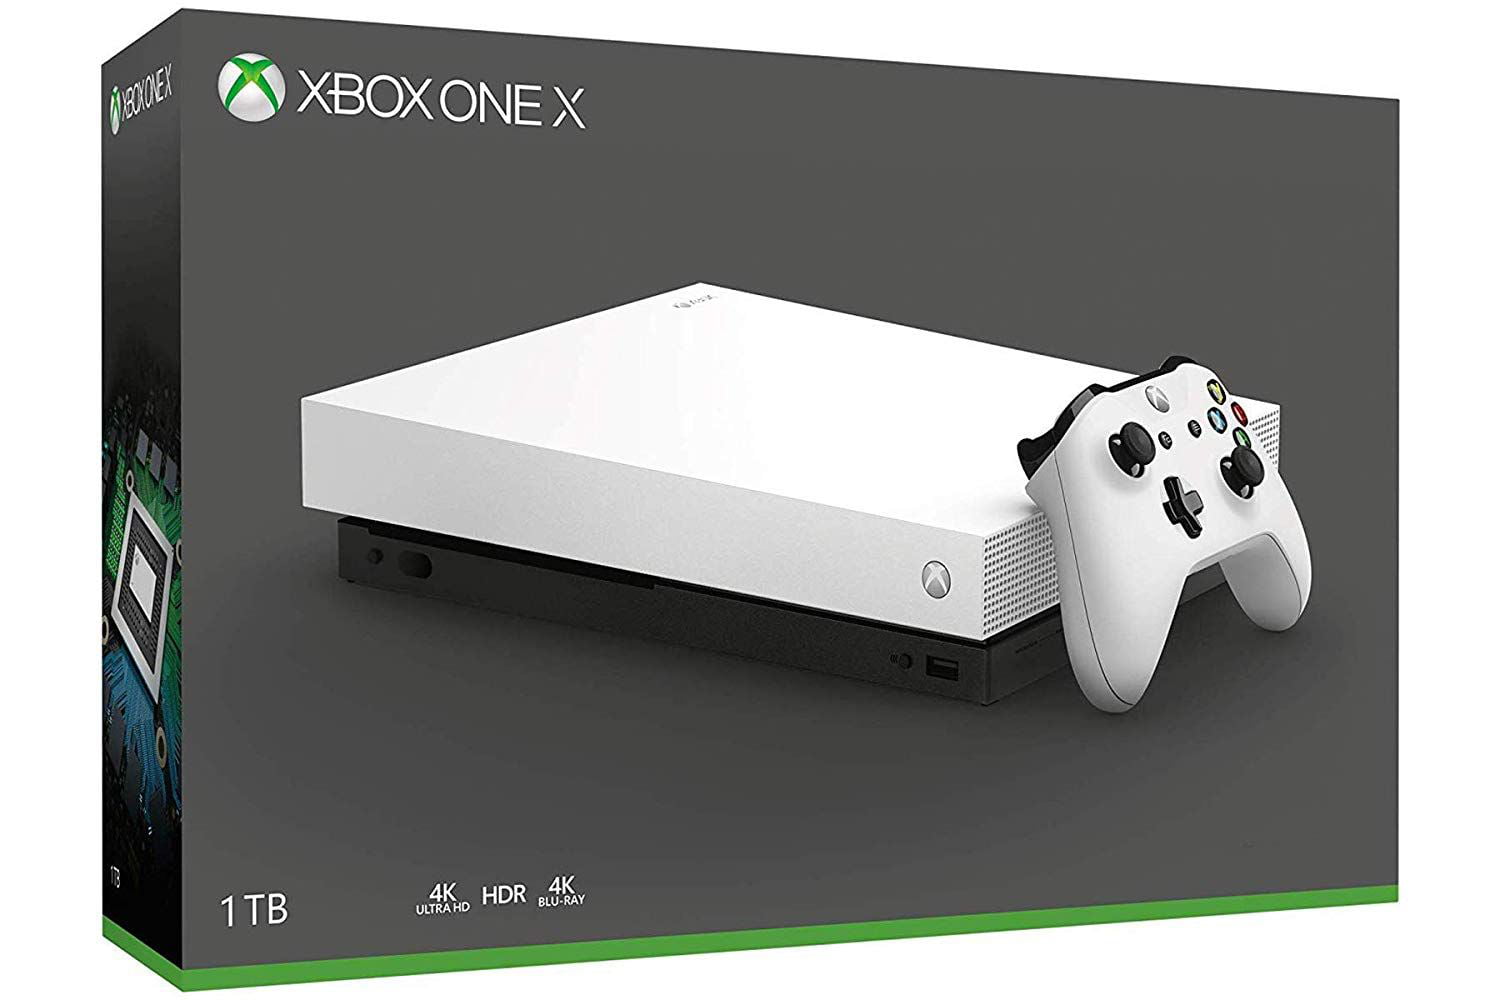 Microsoft Special Robot White Xbox One X Bundle: Limited Edition Xbox One X True 4K HDR White Console with Robot White Xbox One Wireless Controller